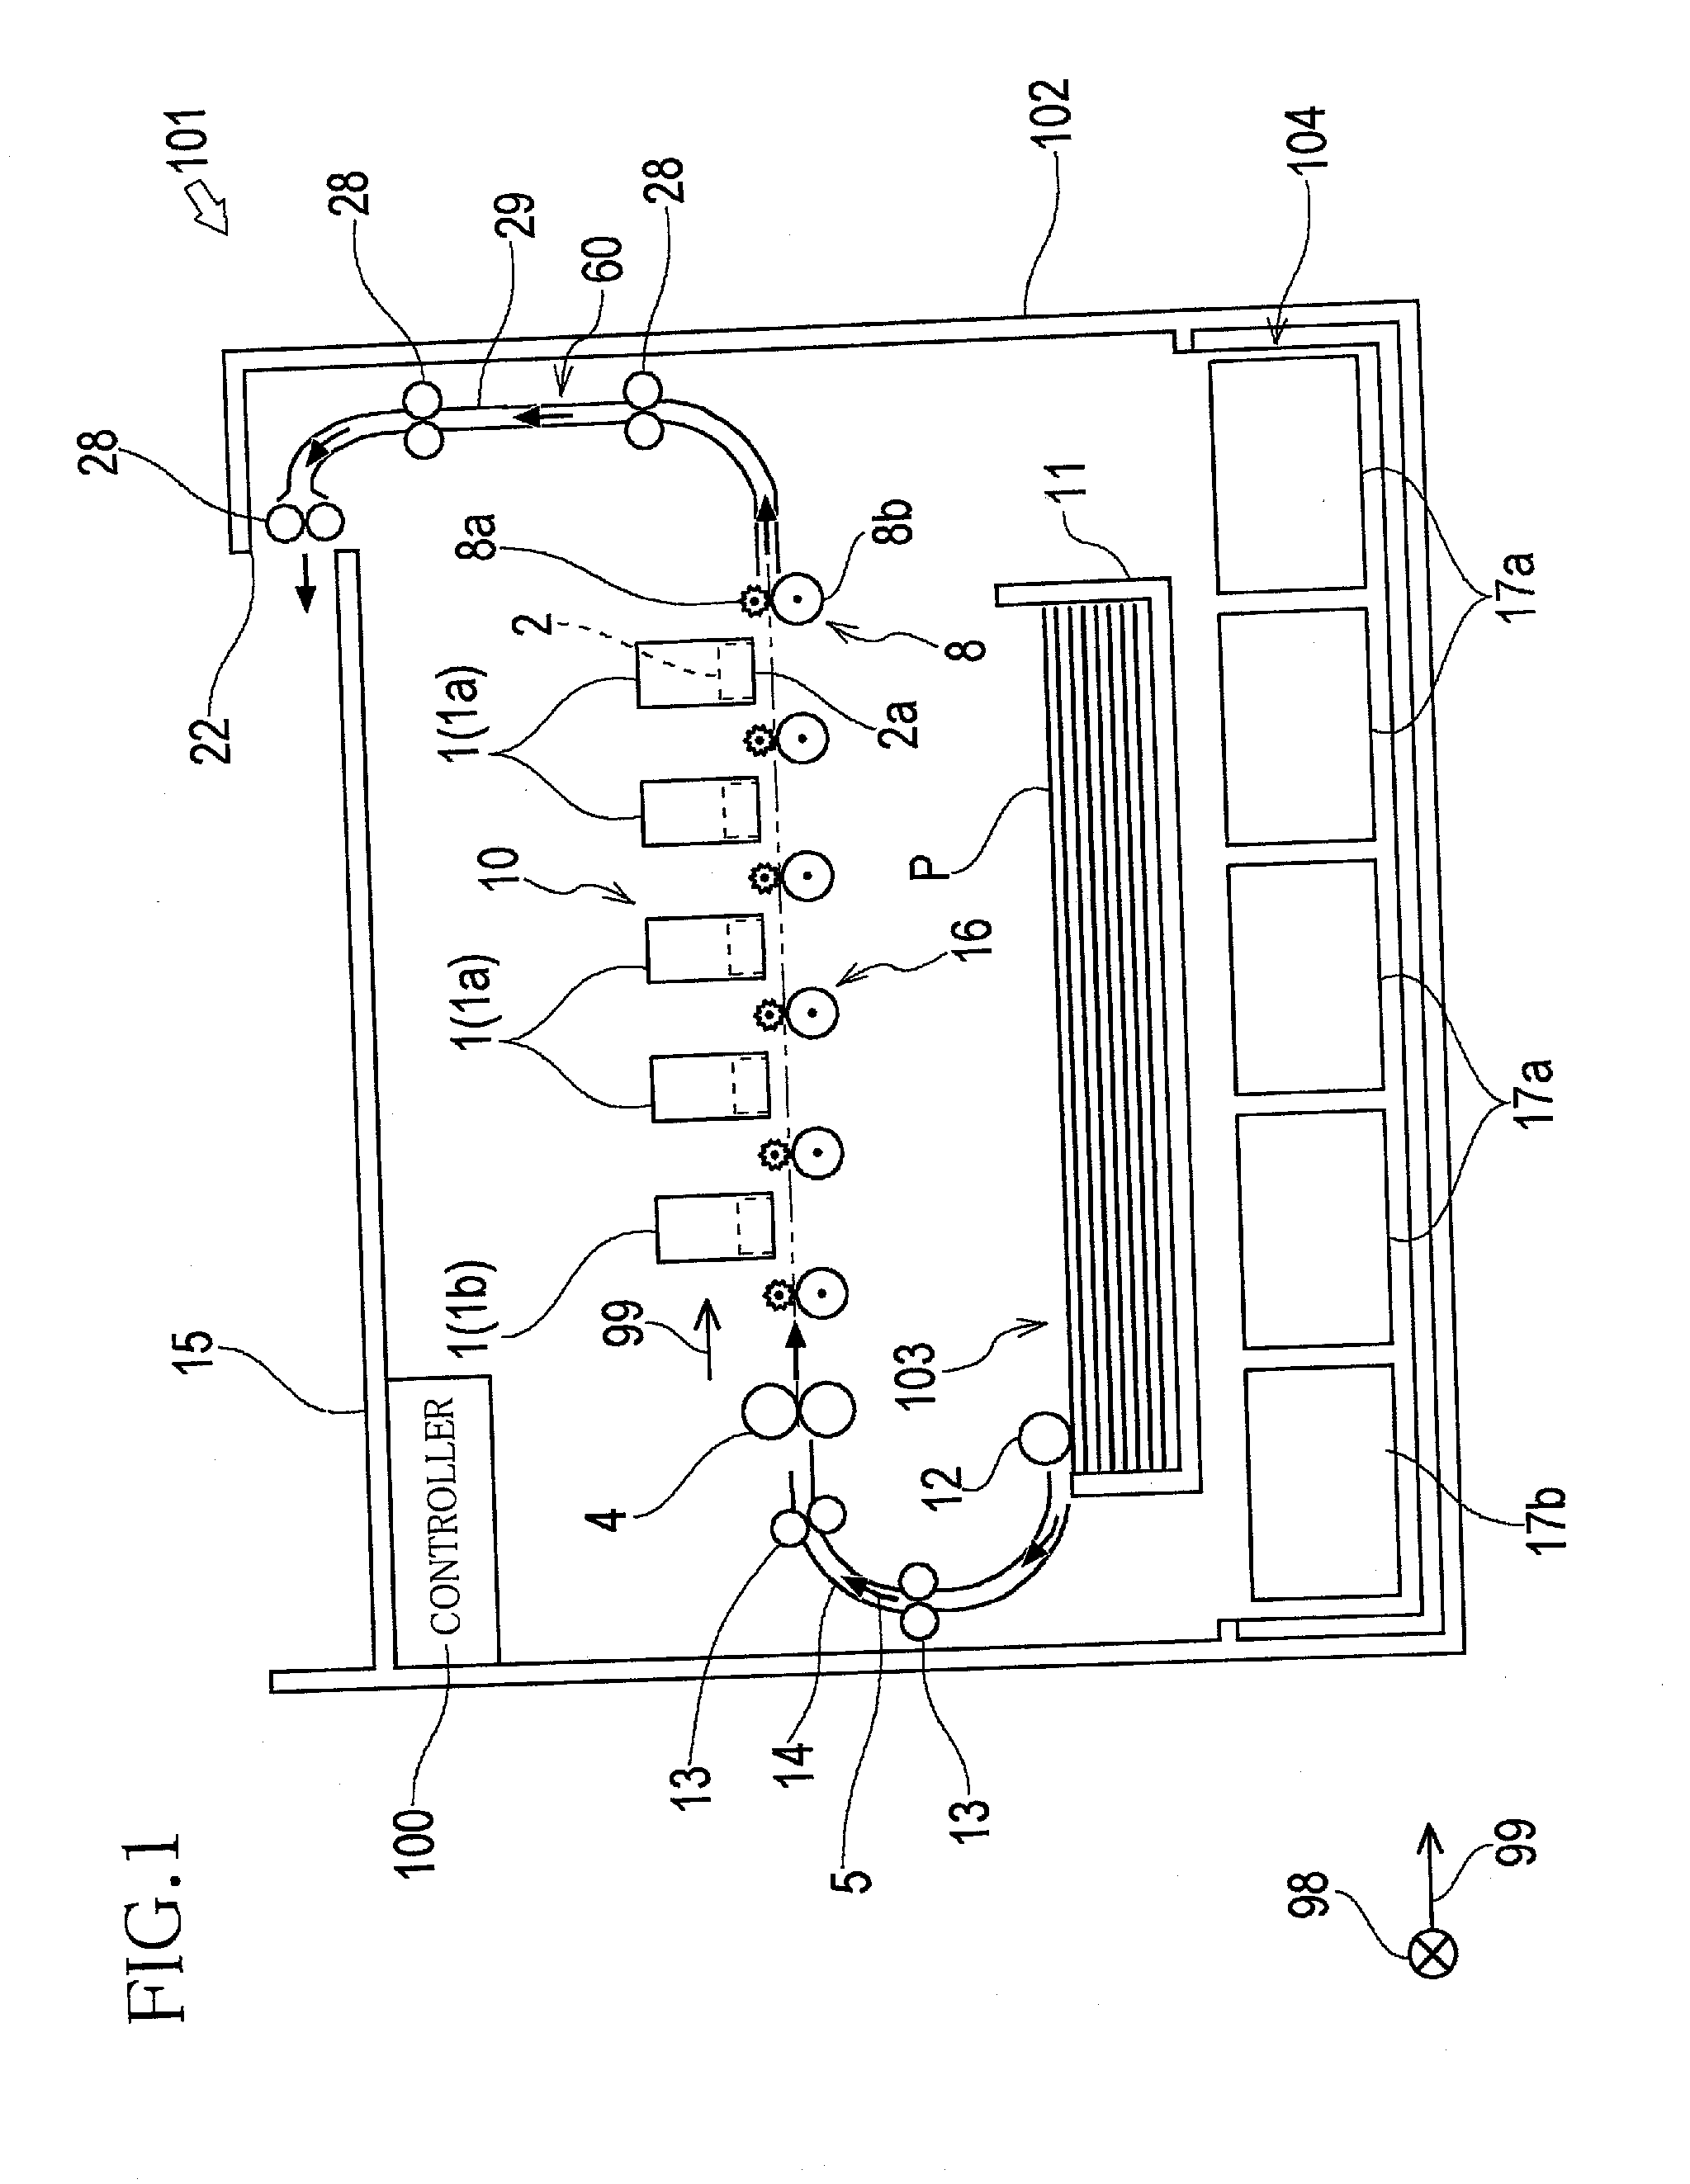 Liquid-droplet ejecting apparatus, method for controlling the same, and nonvolatile storage medium storing program for controlling the apparatus